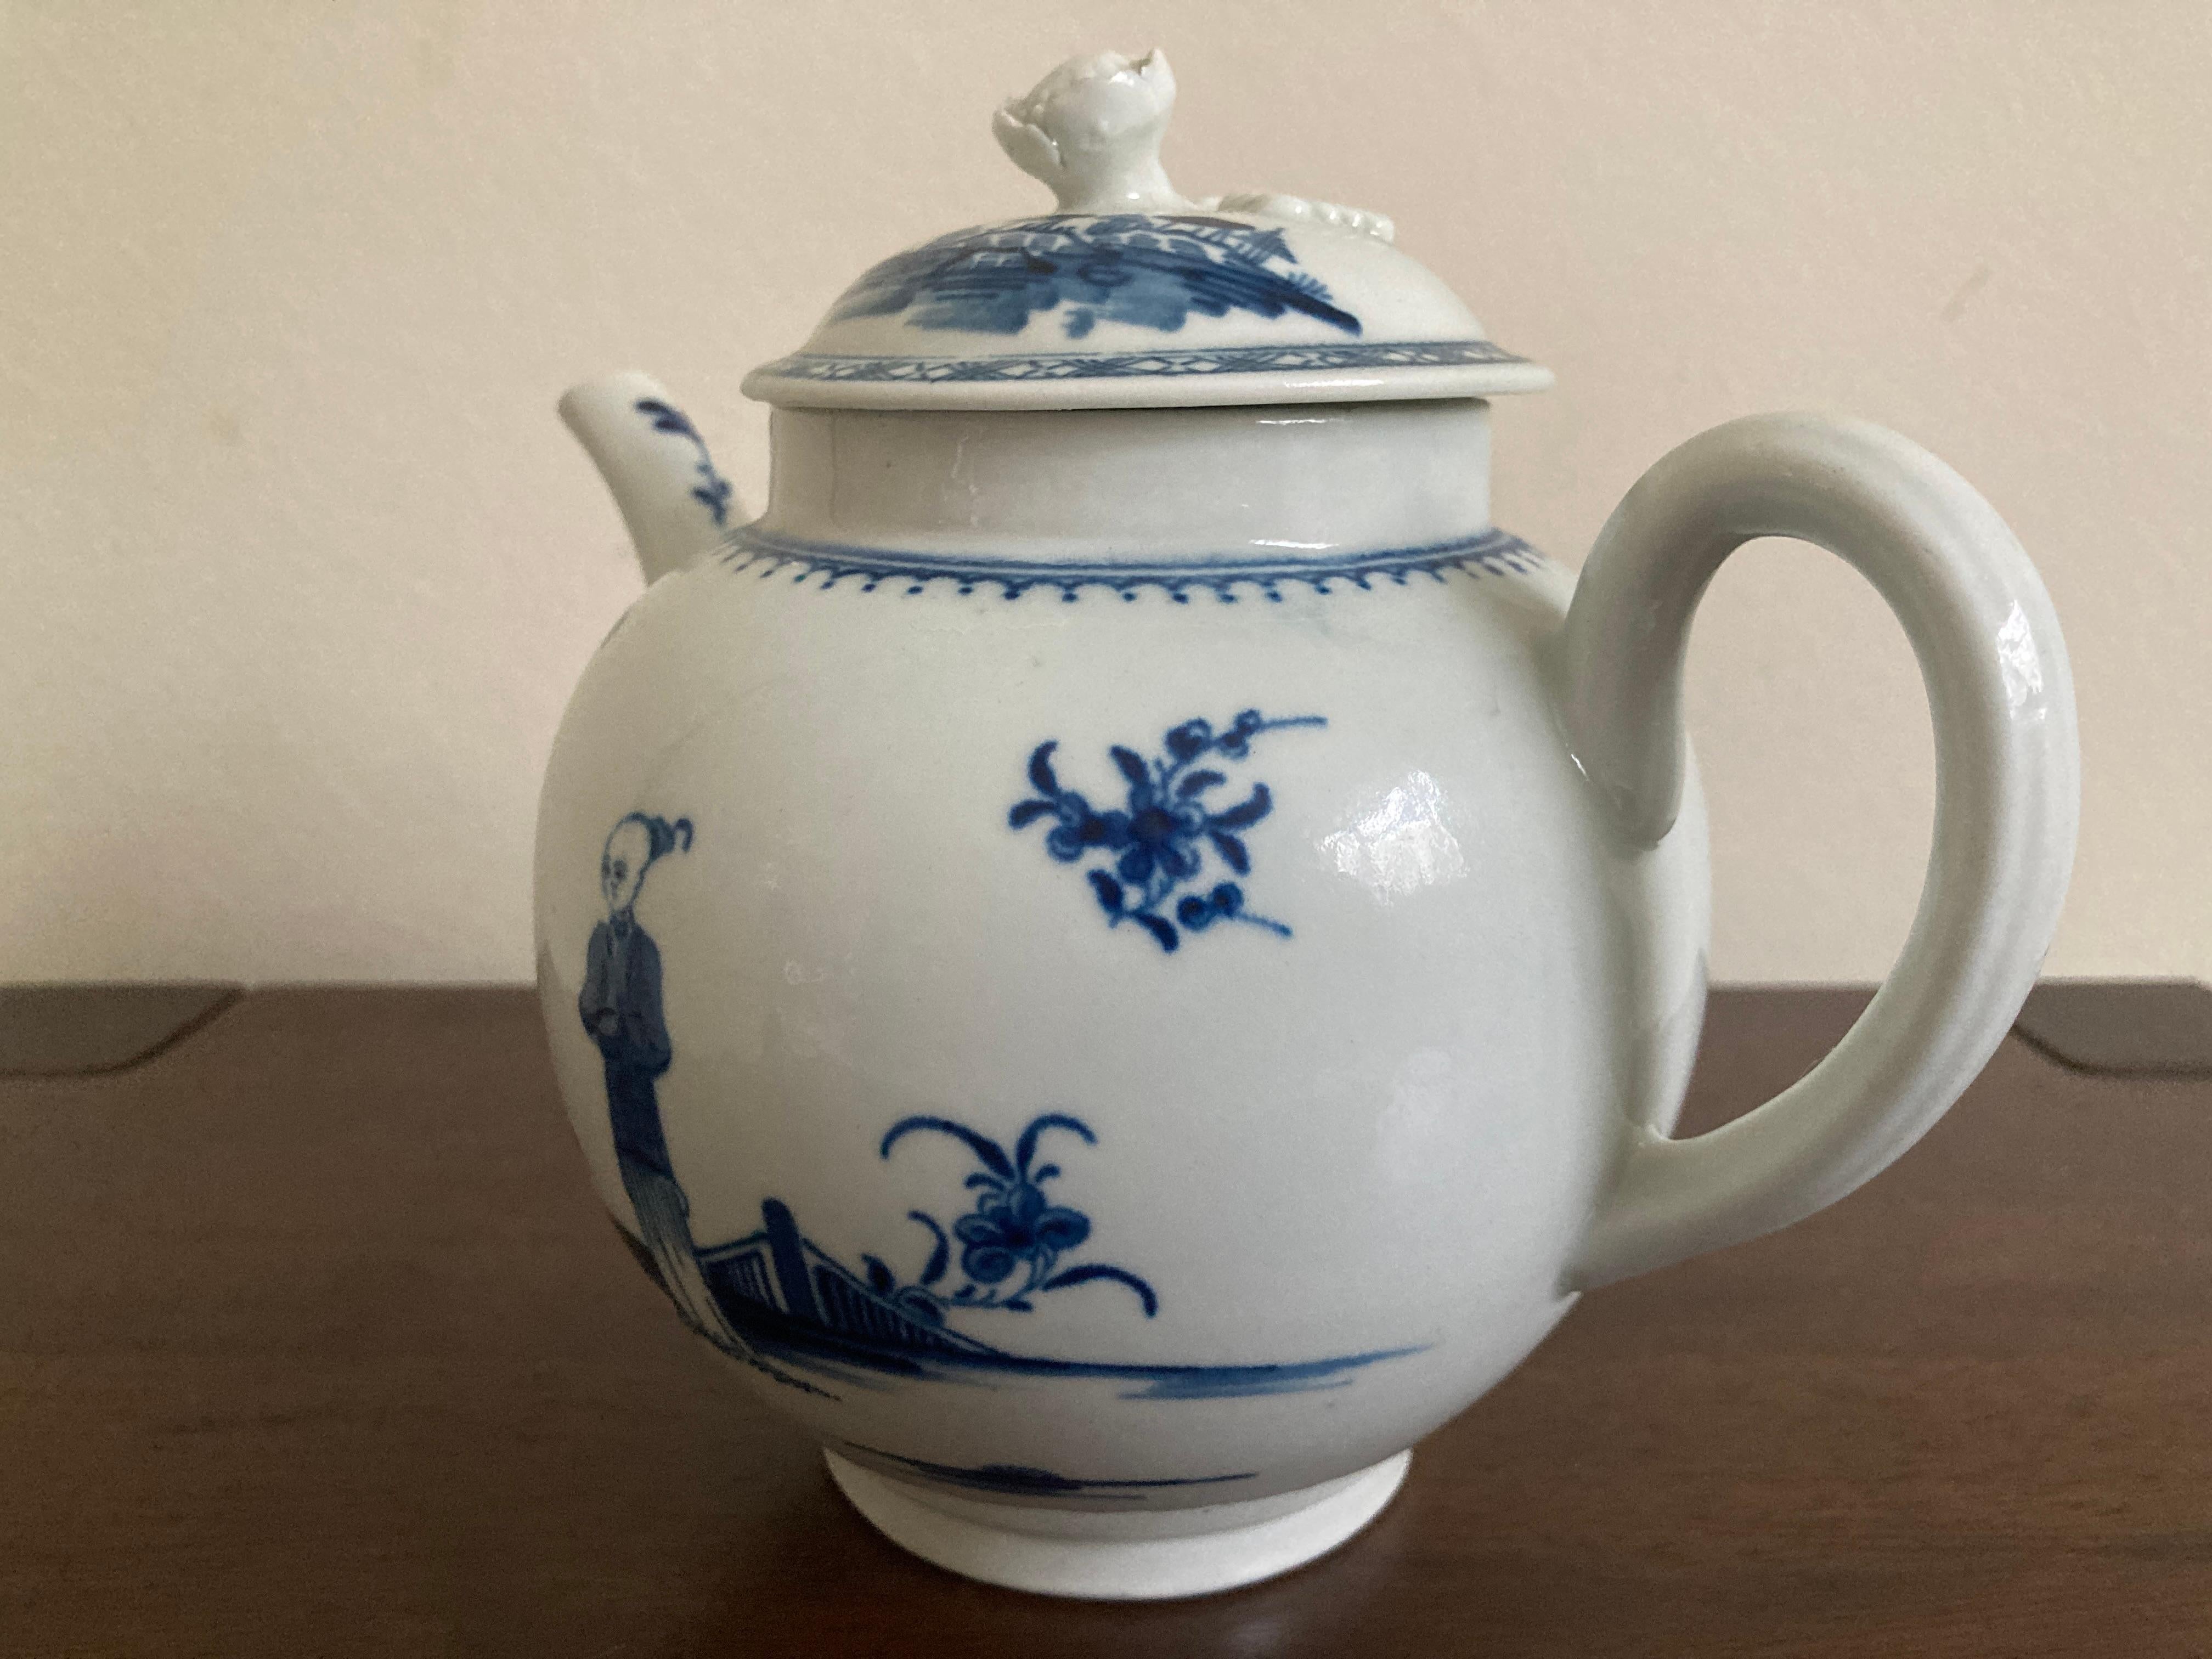 Late 18th Century First Period Worcester Teapot 'Waiting Chinaman' Pattern circa 1770 For Sale